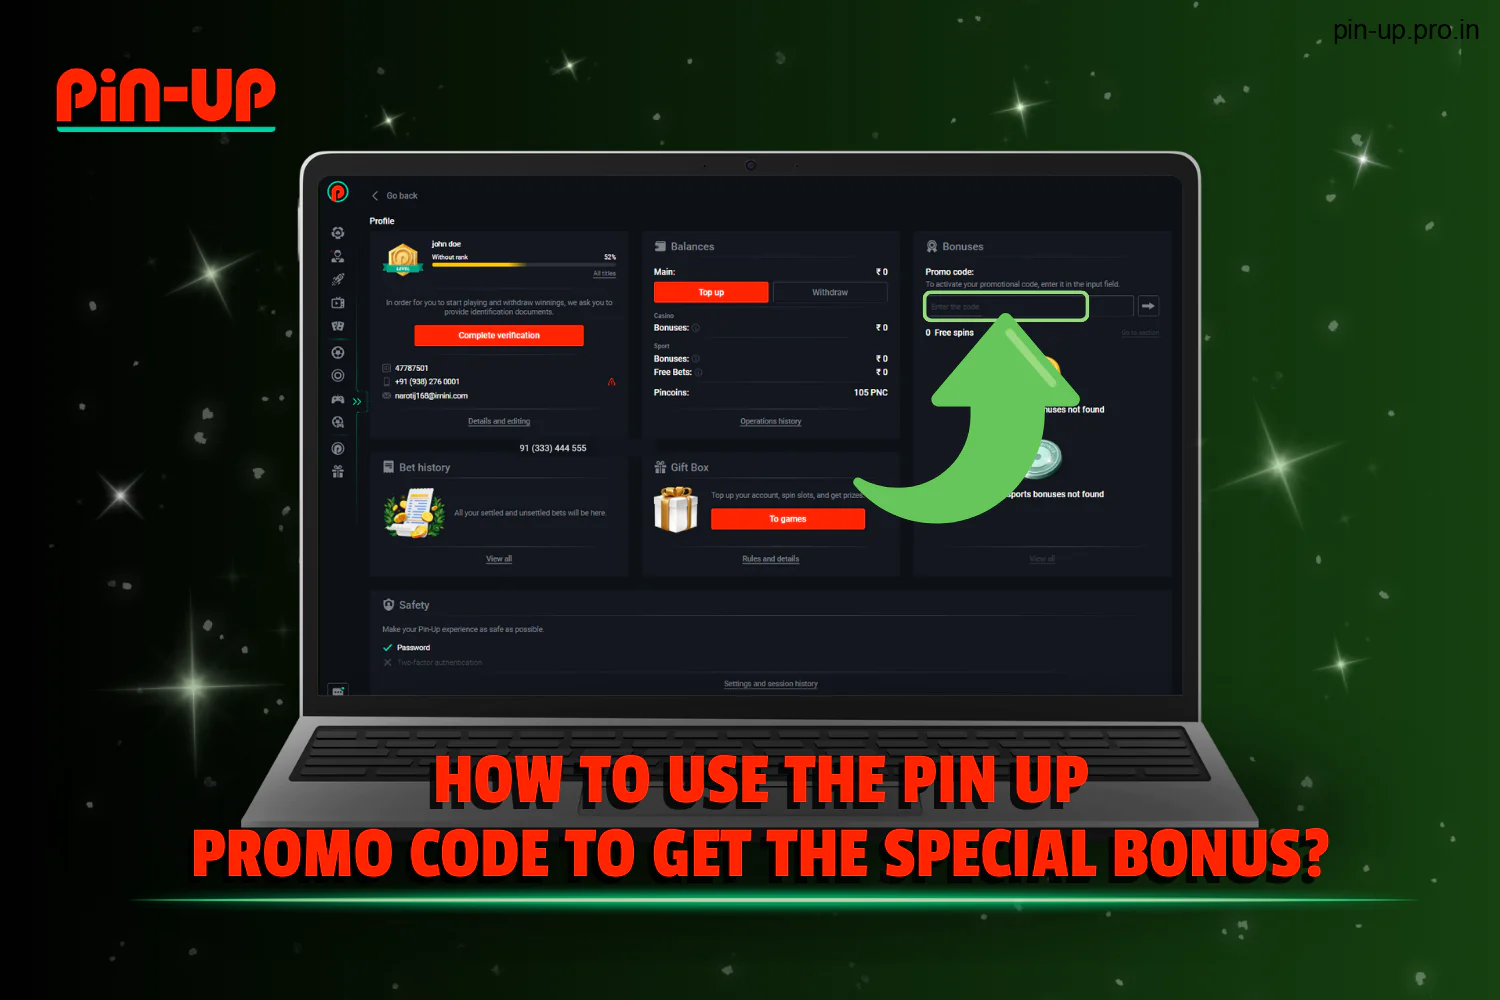 Indian Pin Up users receive detailed instructions on how to use the promo code to claim a special bonus